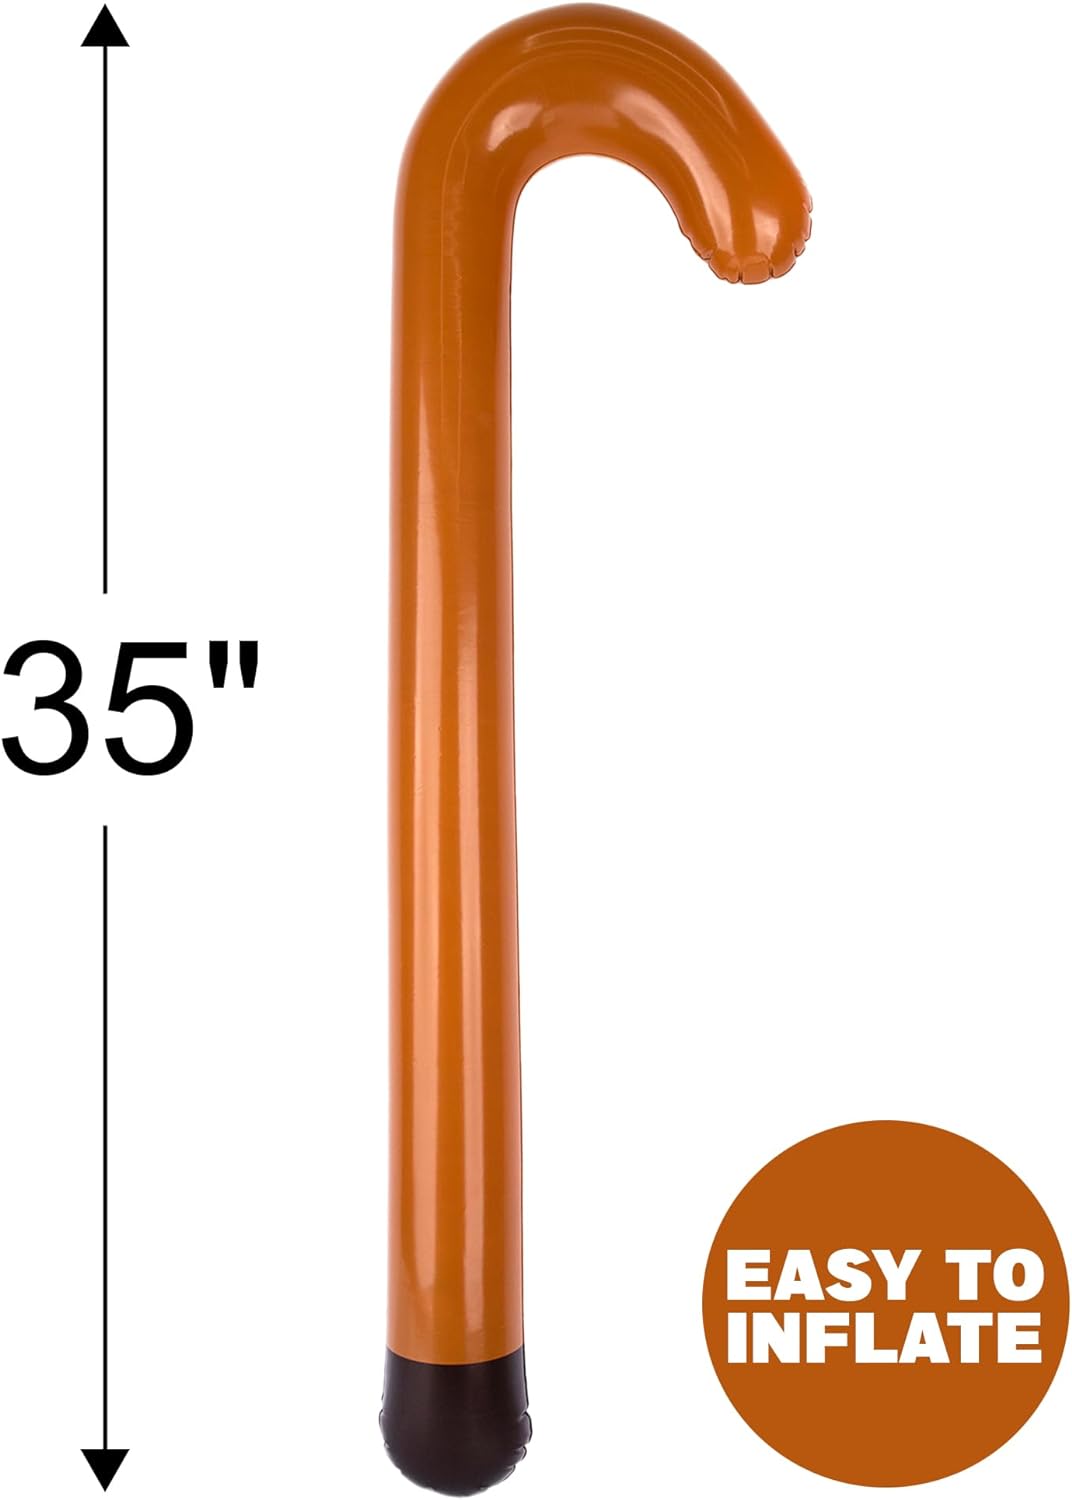 Large Inflatable Cane Prop - Set of 2, 35 Inches, Brown & Black Inflatable Kids Toy Canes